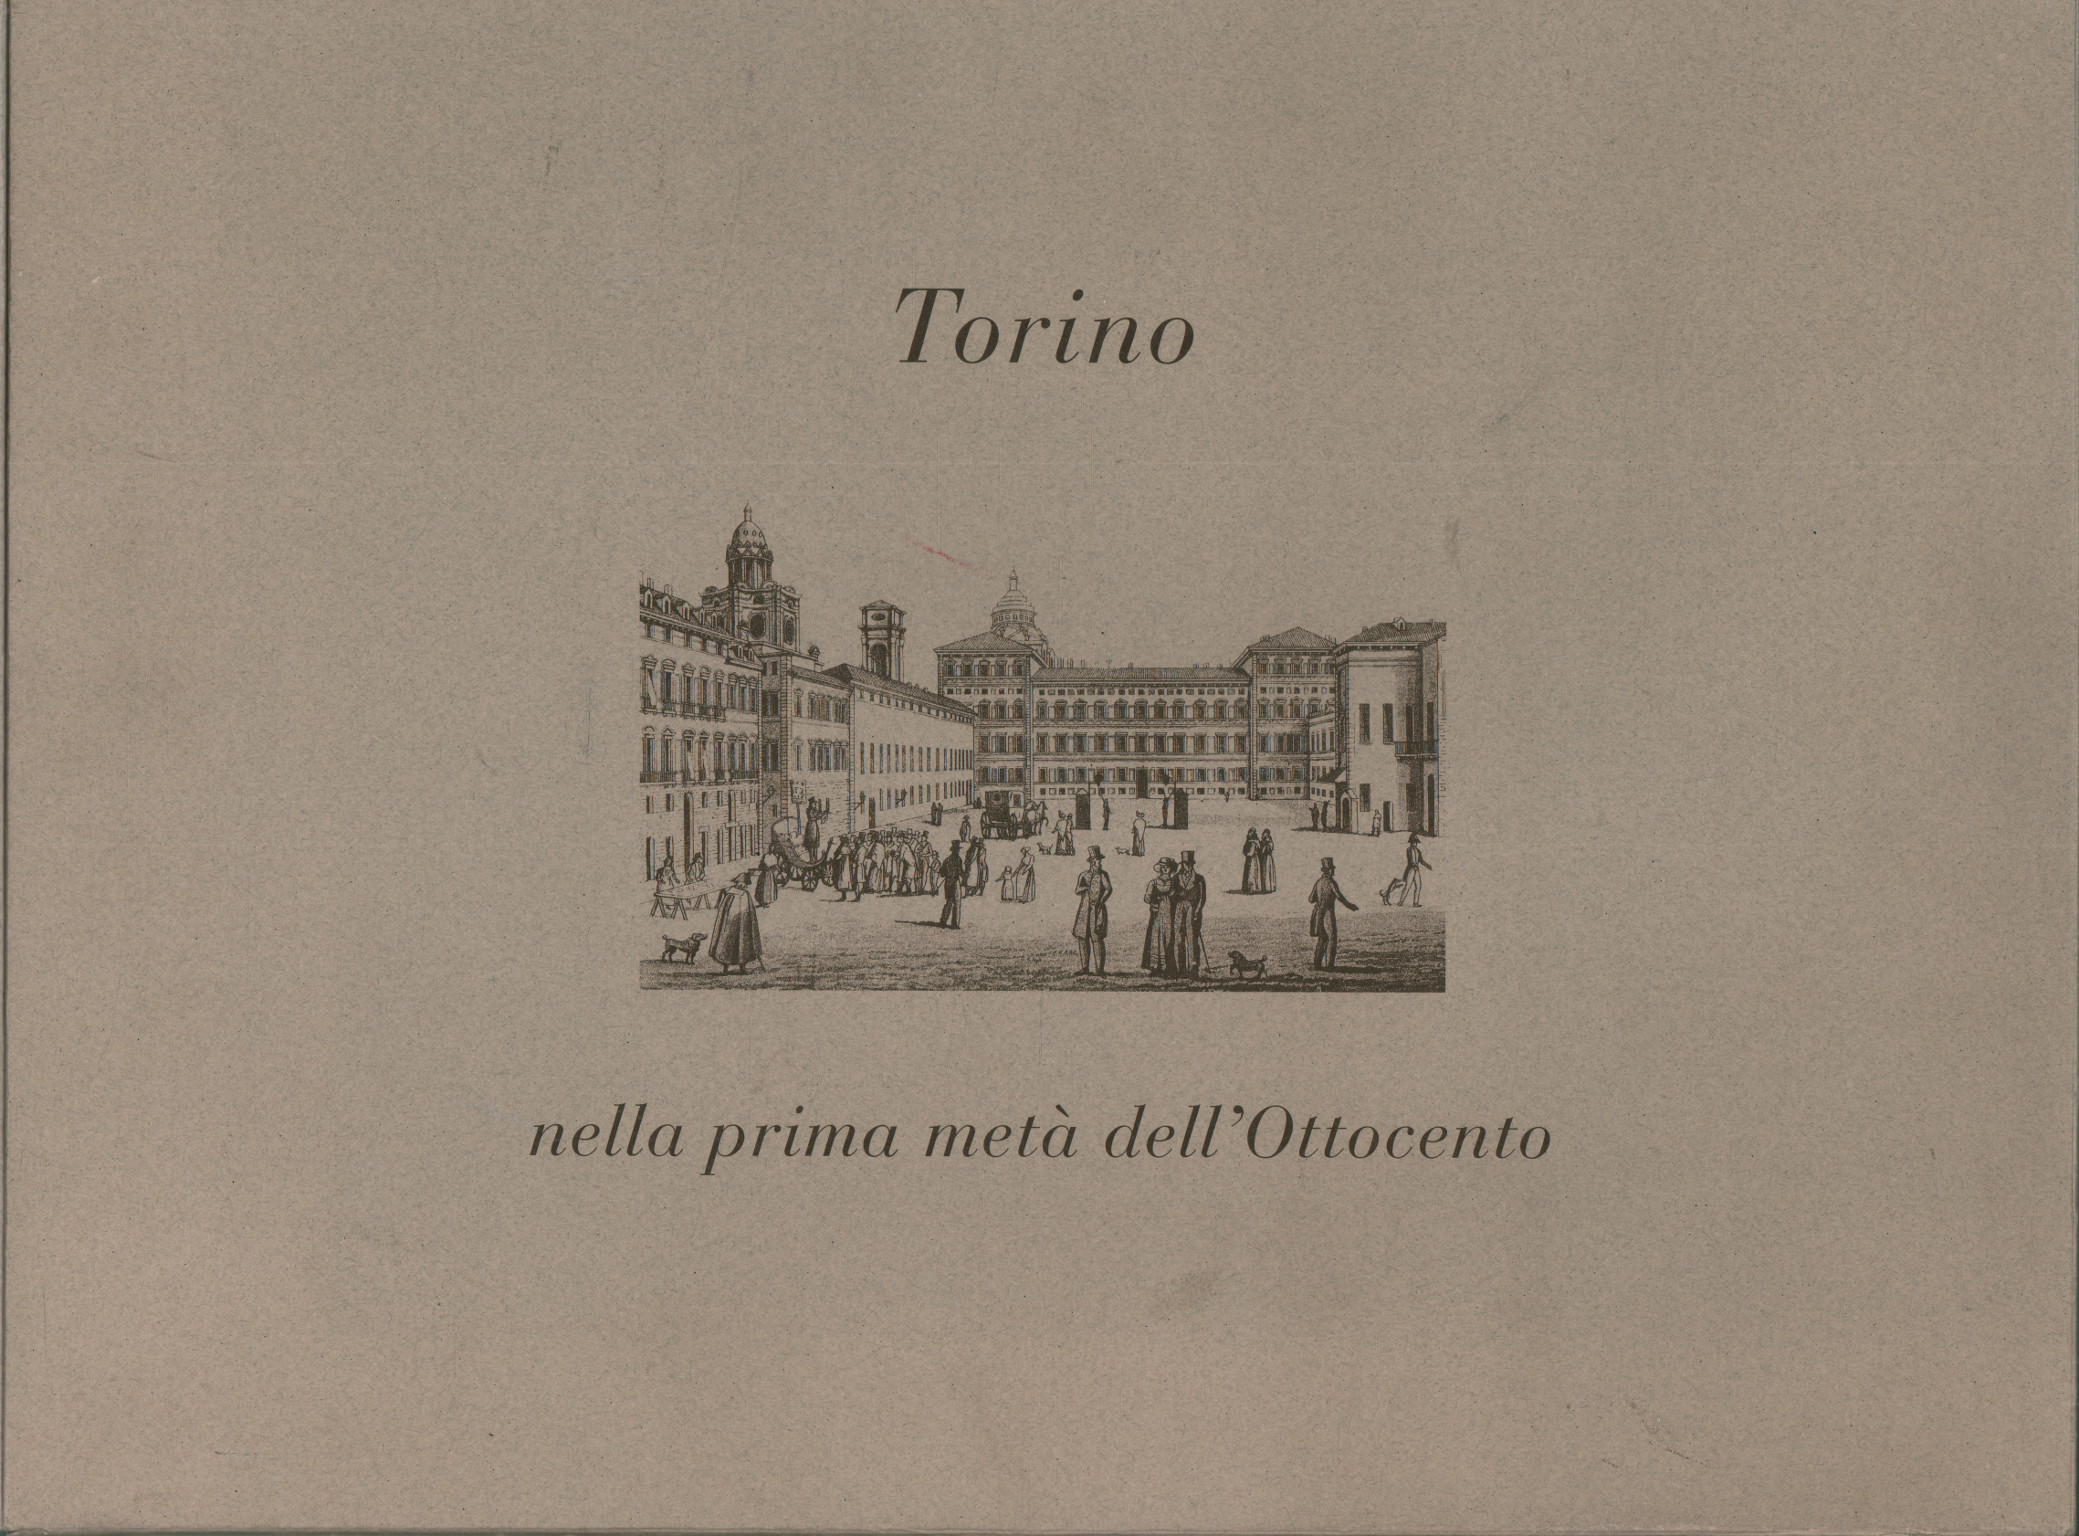 Turin in the first half of the nineteenth century and the vedut, Ada Peyrot